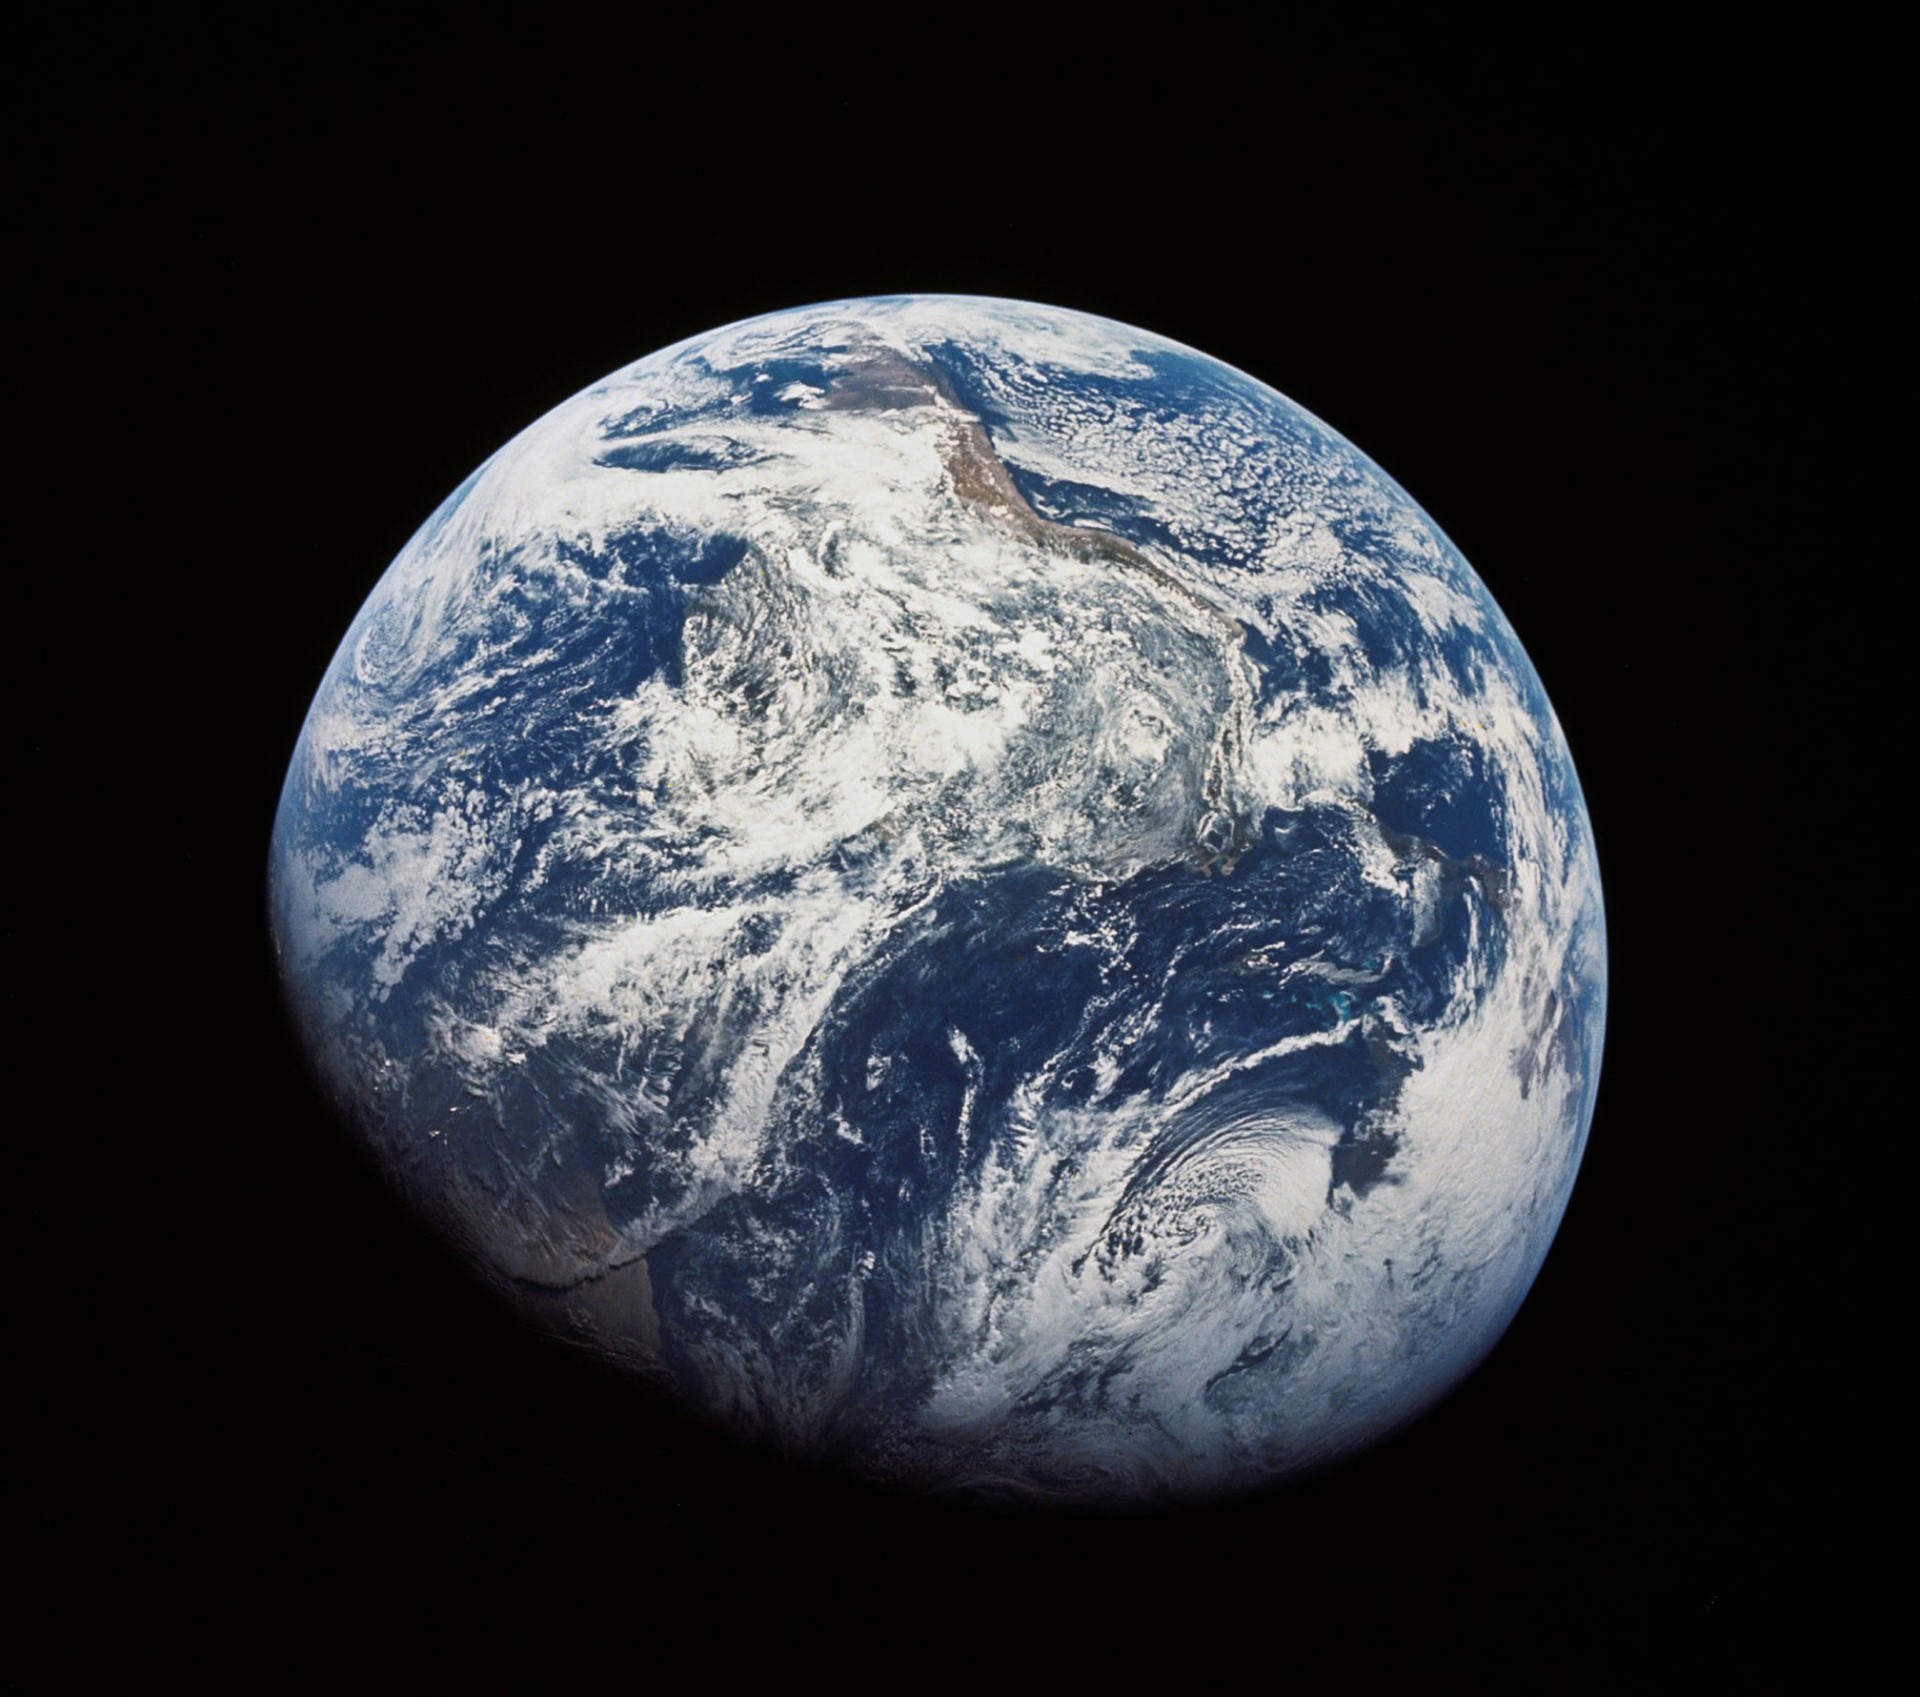 This is a public domain image created by NASA.